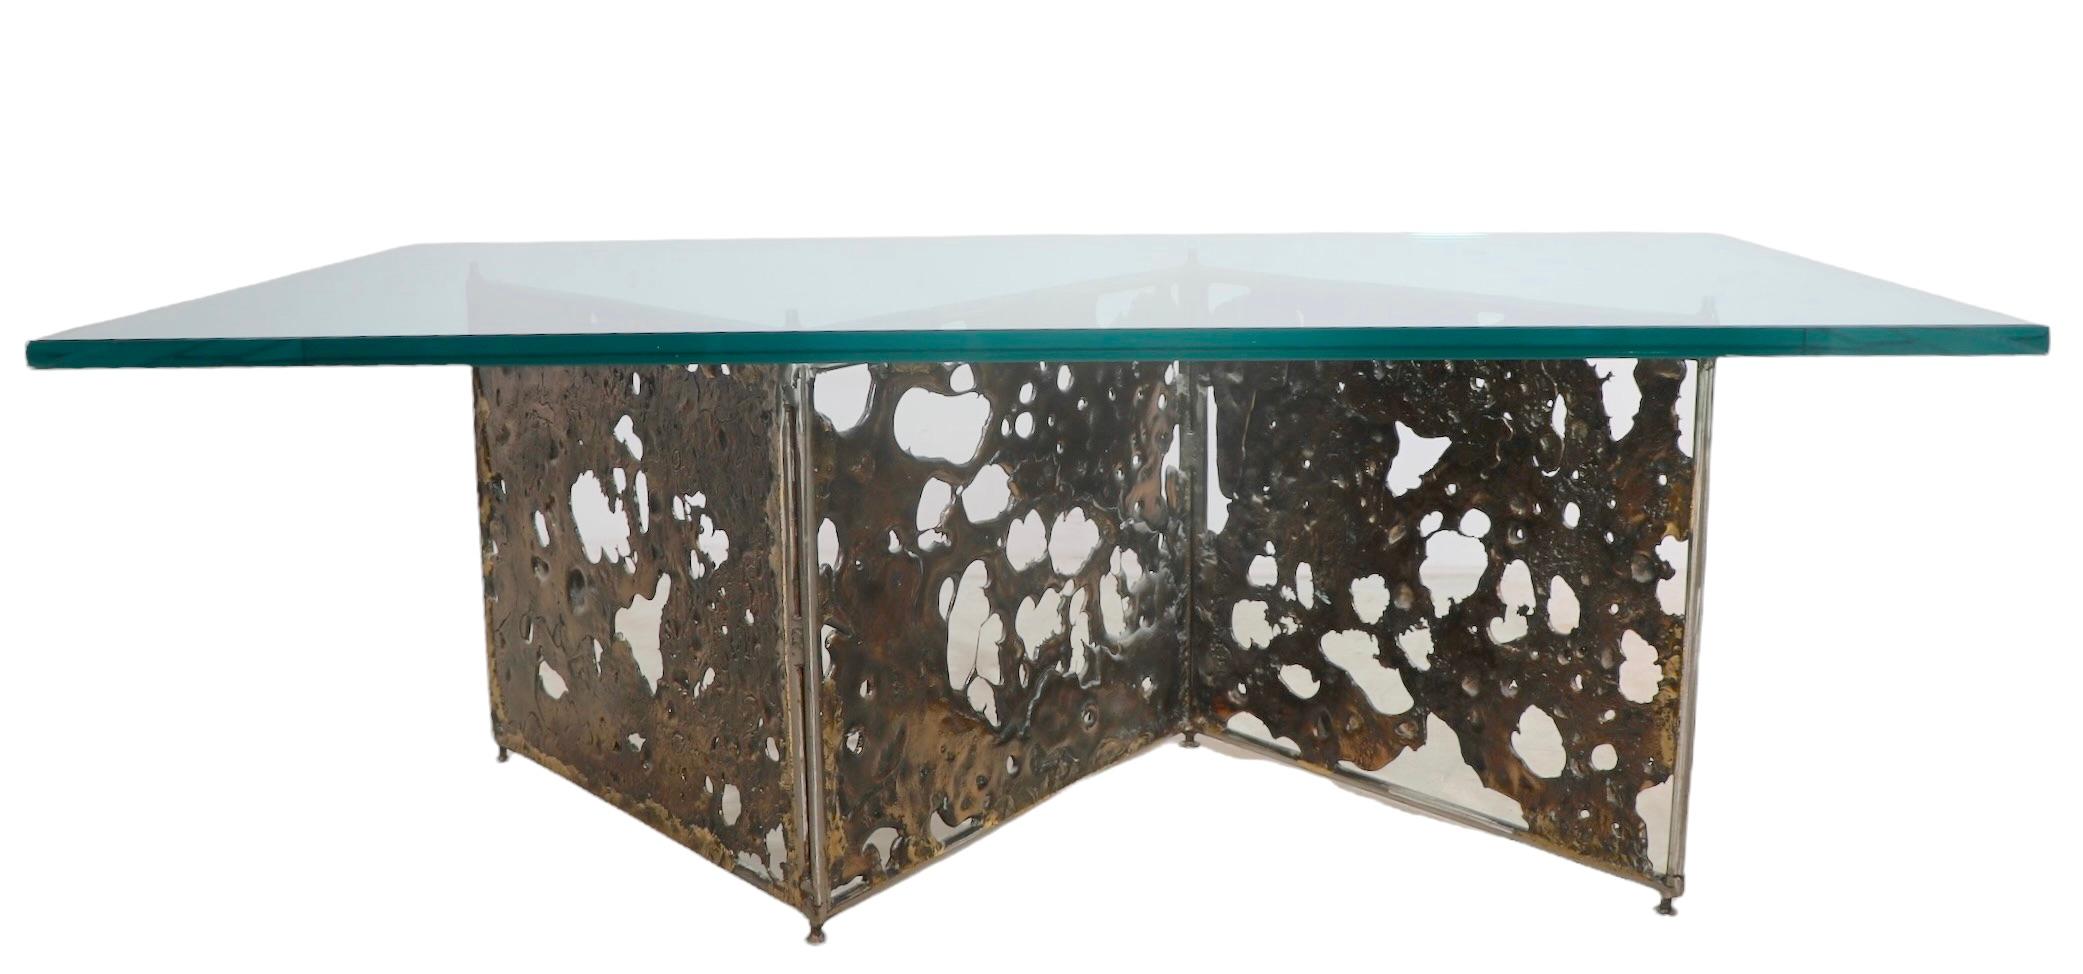 Brutalist Bronze and Glass Coffee Table Signed Silias Seandel 88 1